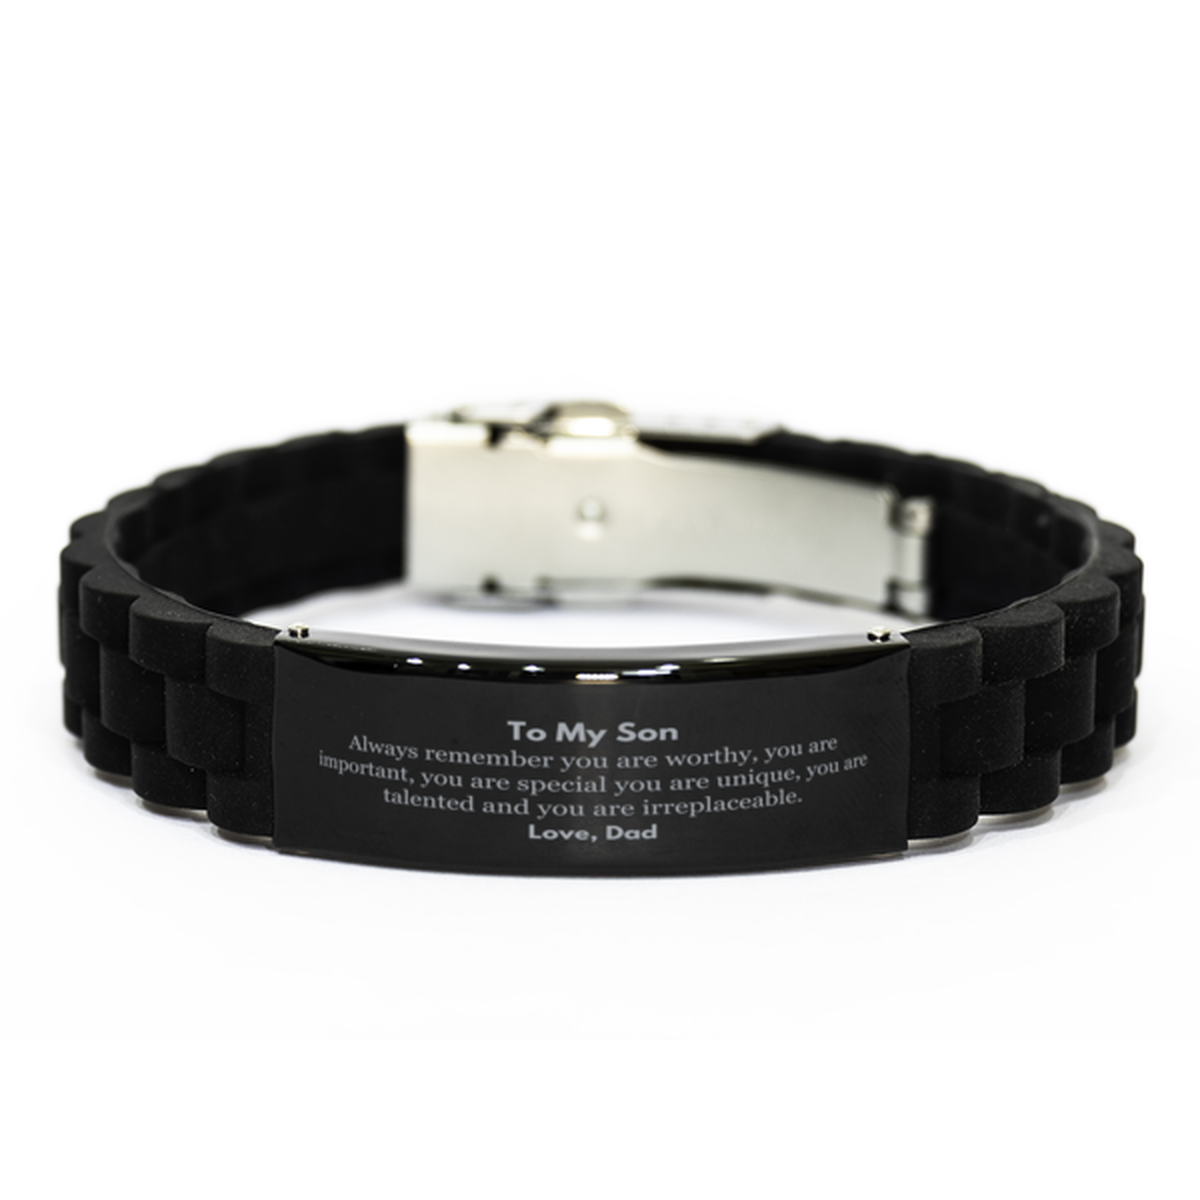 Son Birthday Gifts from Dad, Inspirational Black Glidelock Clasp Bracelet for Son Christmas Graduation Gifts for Son Always remember you are worthy, you are important. Love, Dad